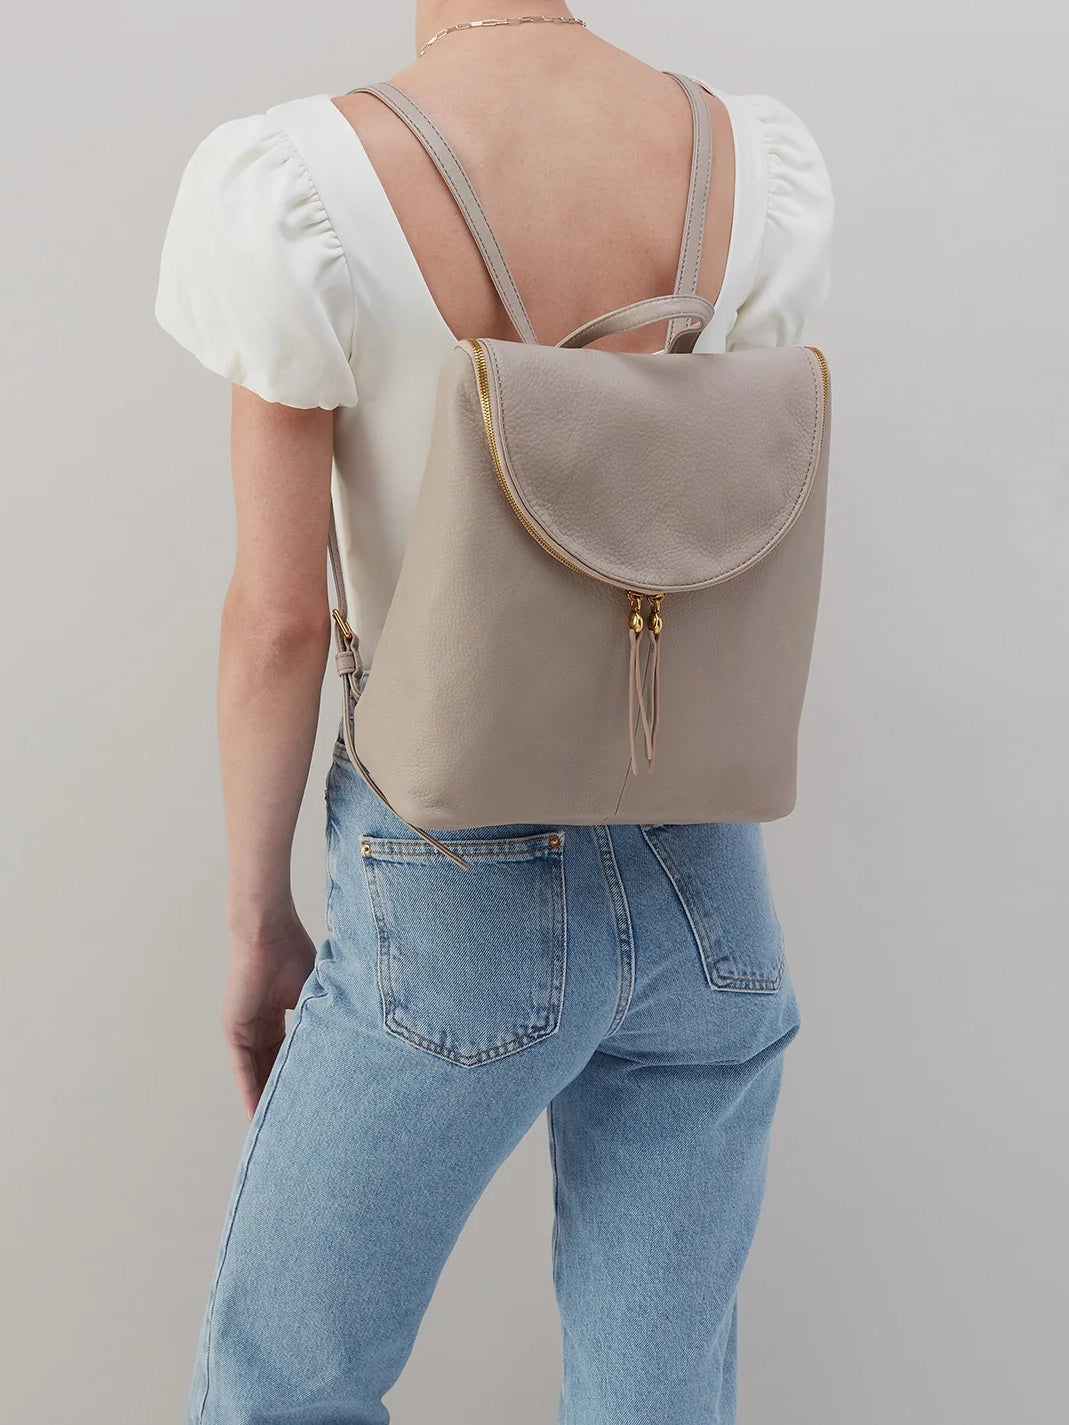 hobo fern backpack in taupe pebbled leather